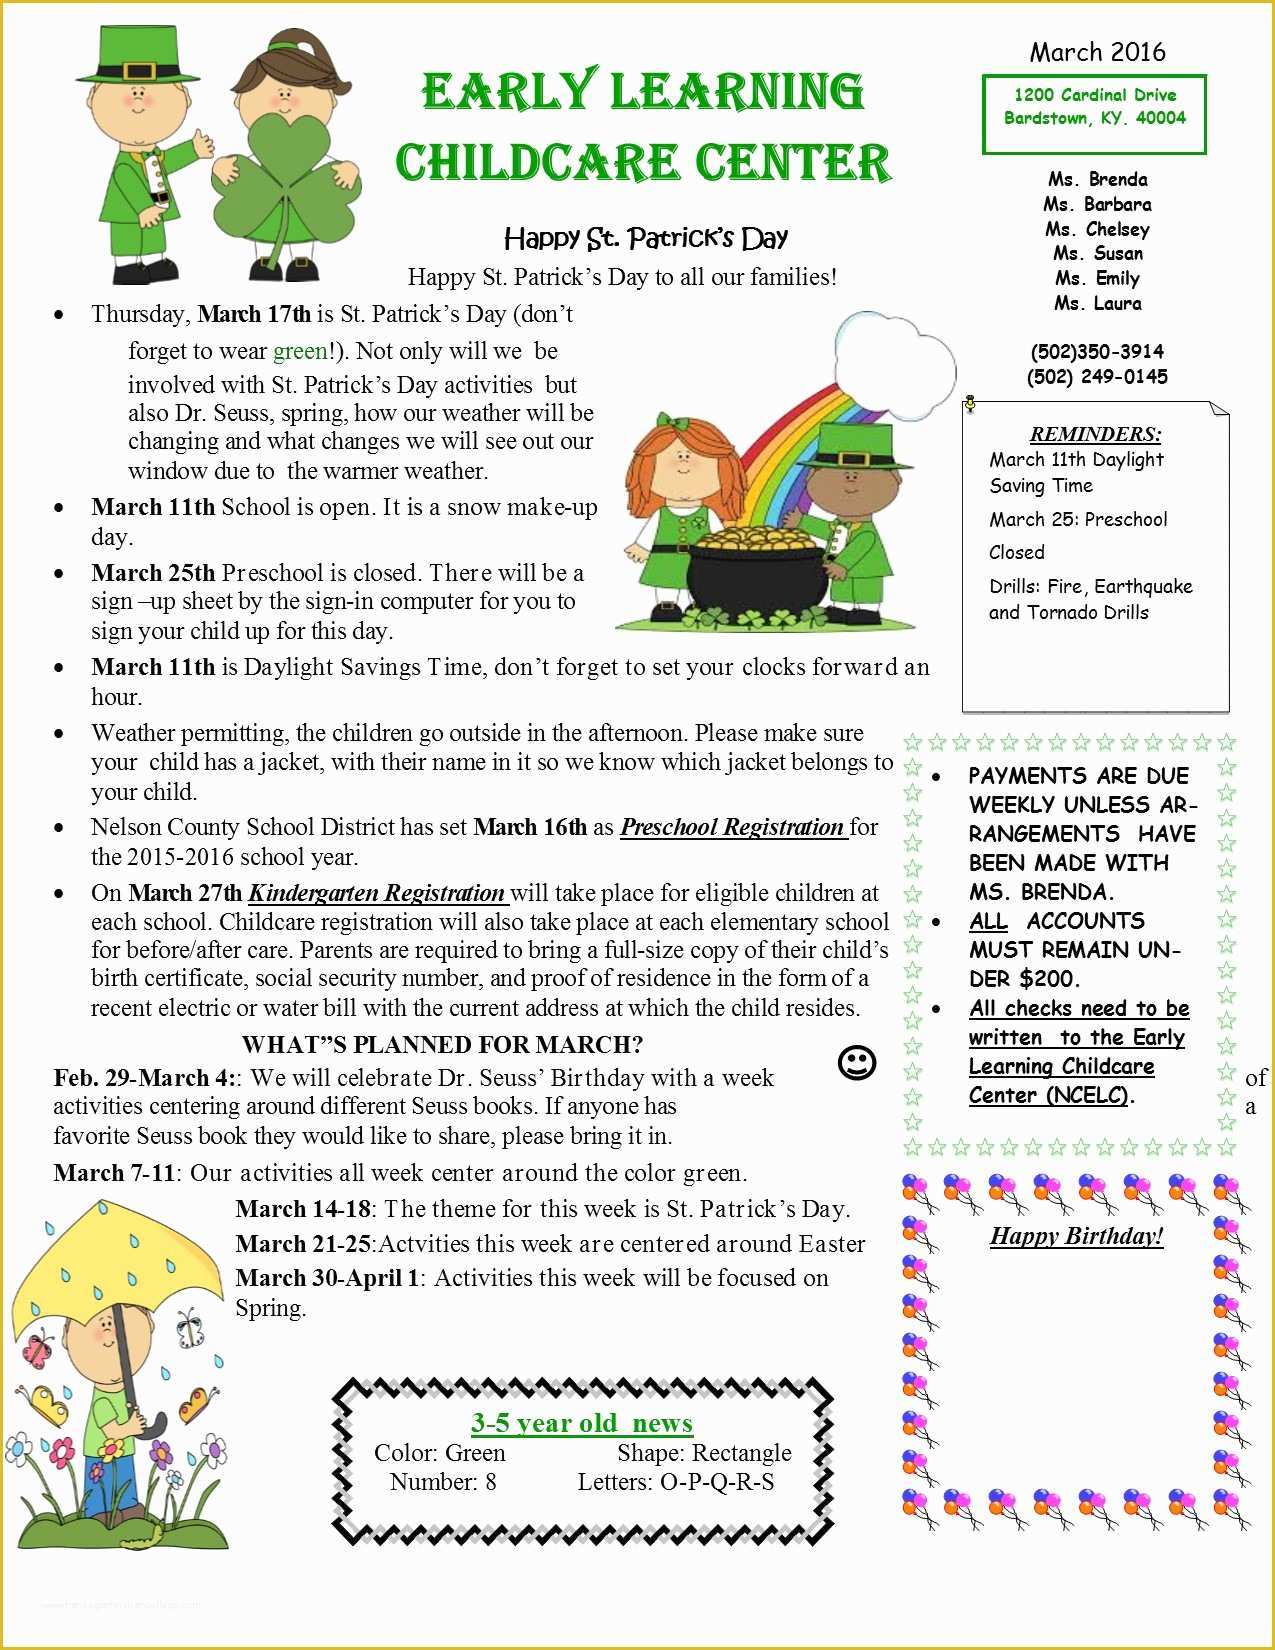 Childcare Newsletter Templates Free Of March Early Learning Childcare Center Newsletter 2016